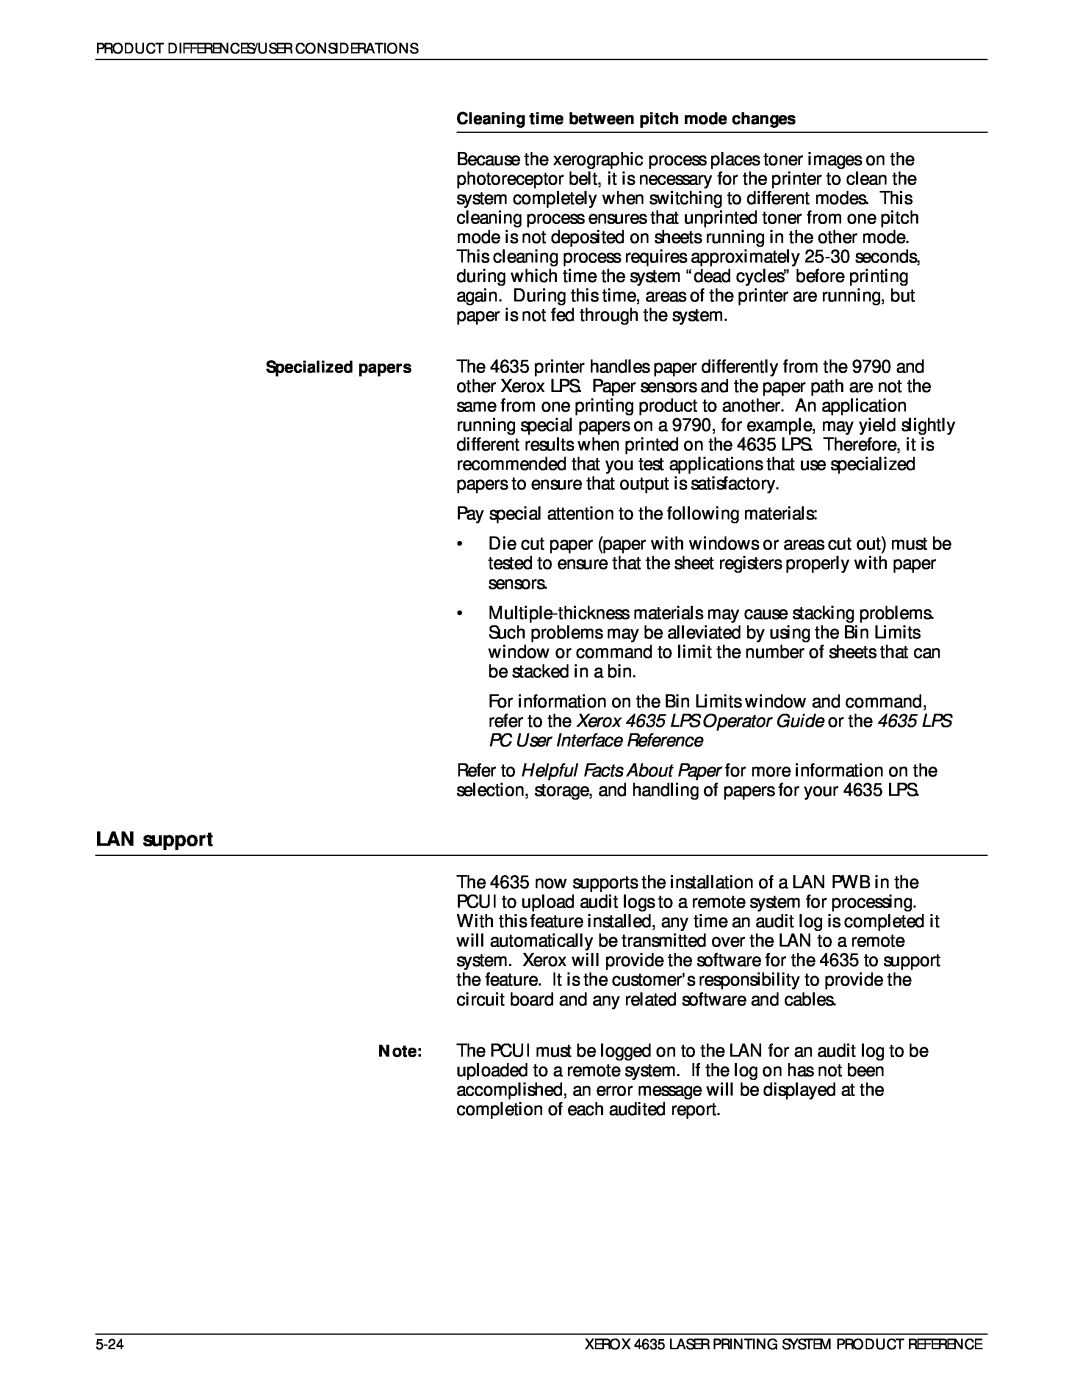 Xerox 721P83071 manual LAN support, Cleaning time between pitch mode changes 